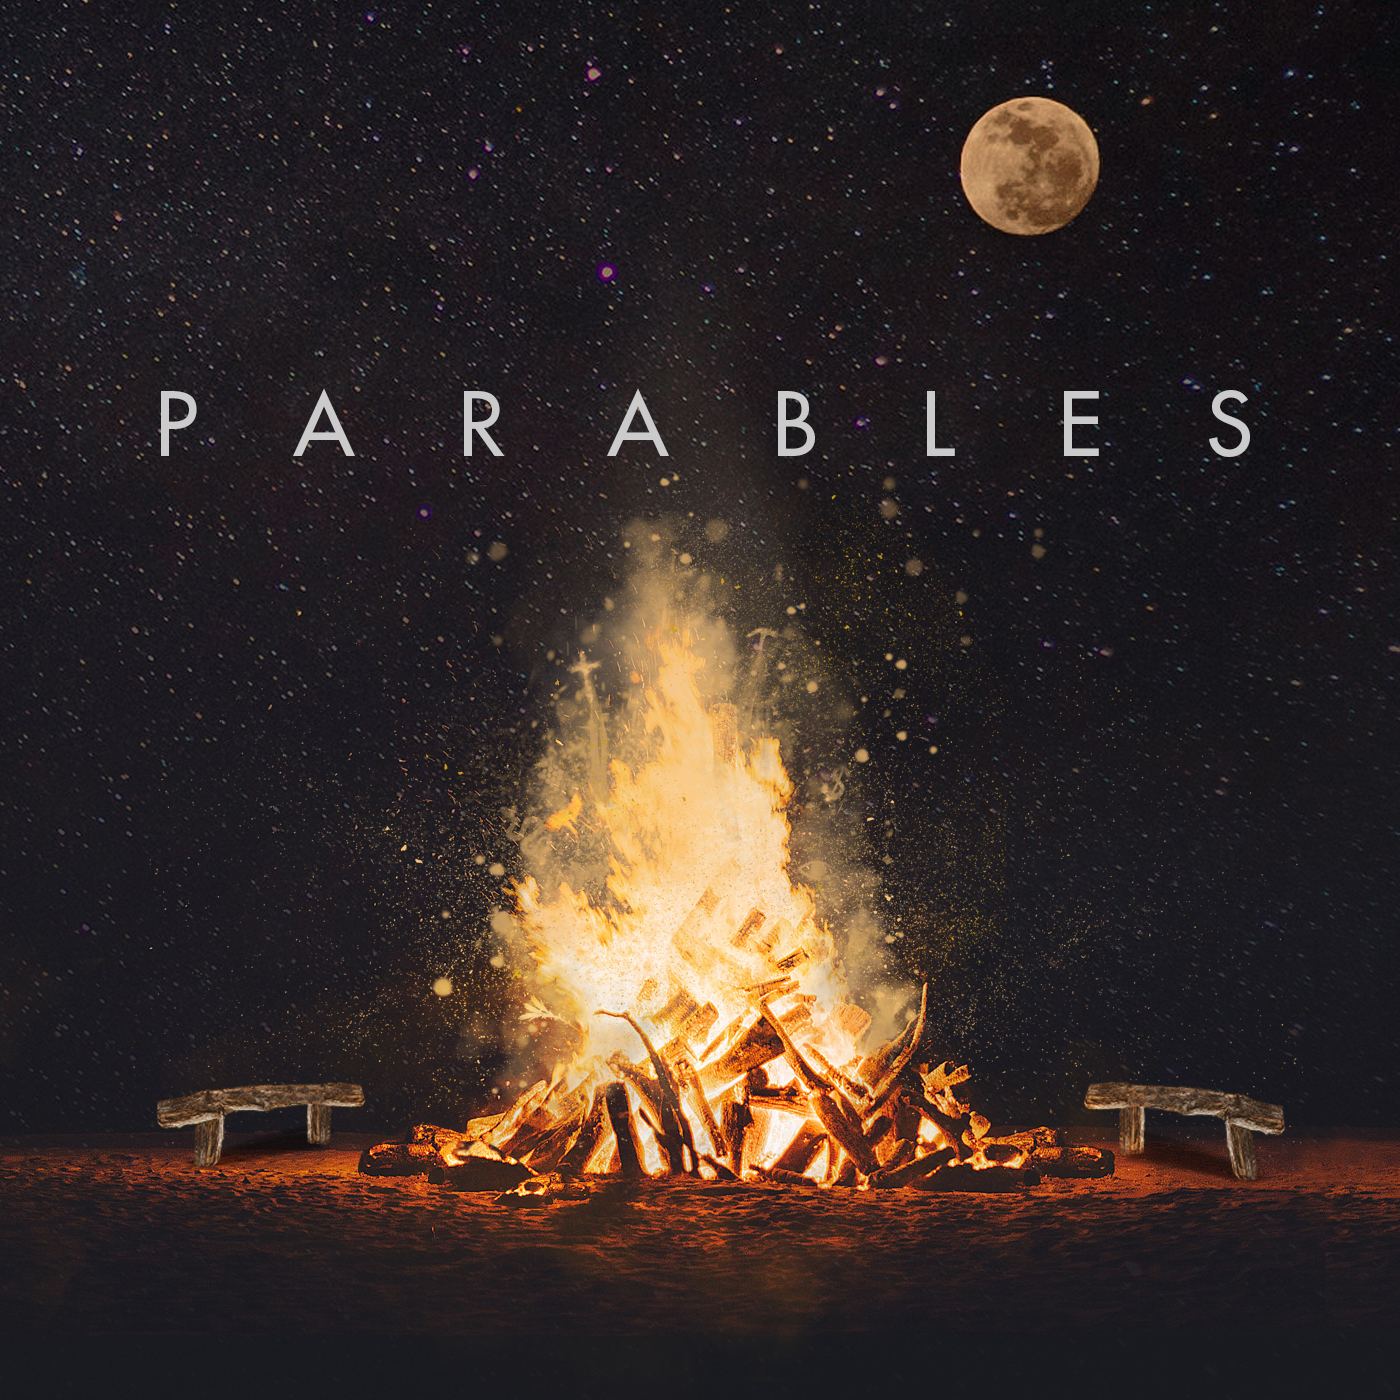 Parables - Lost and Found Chris Wall - 9-22-2019